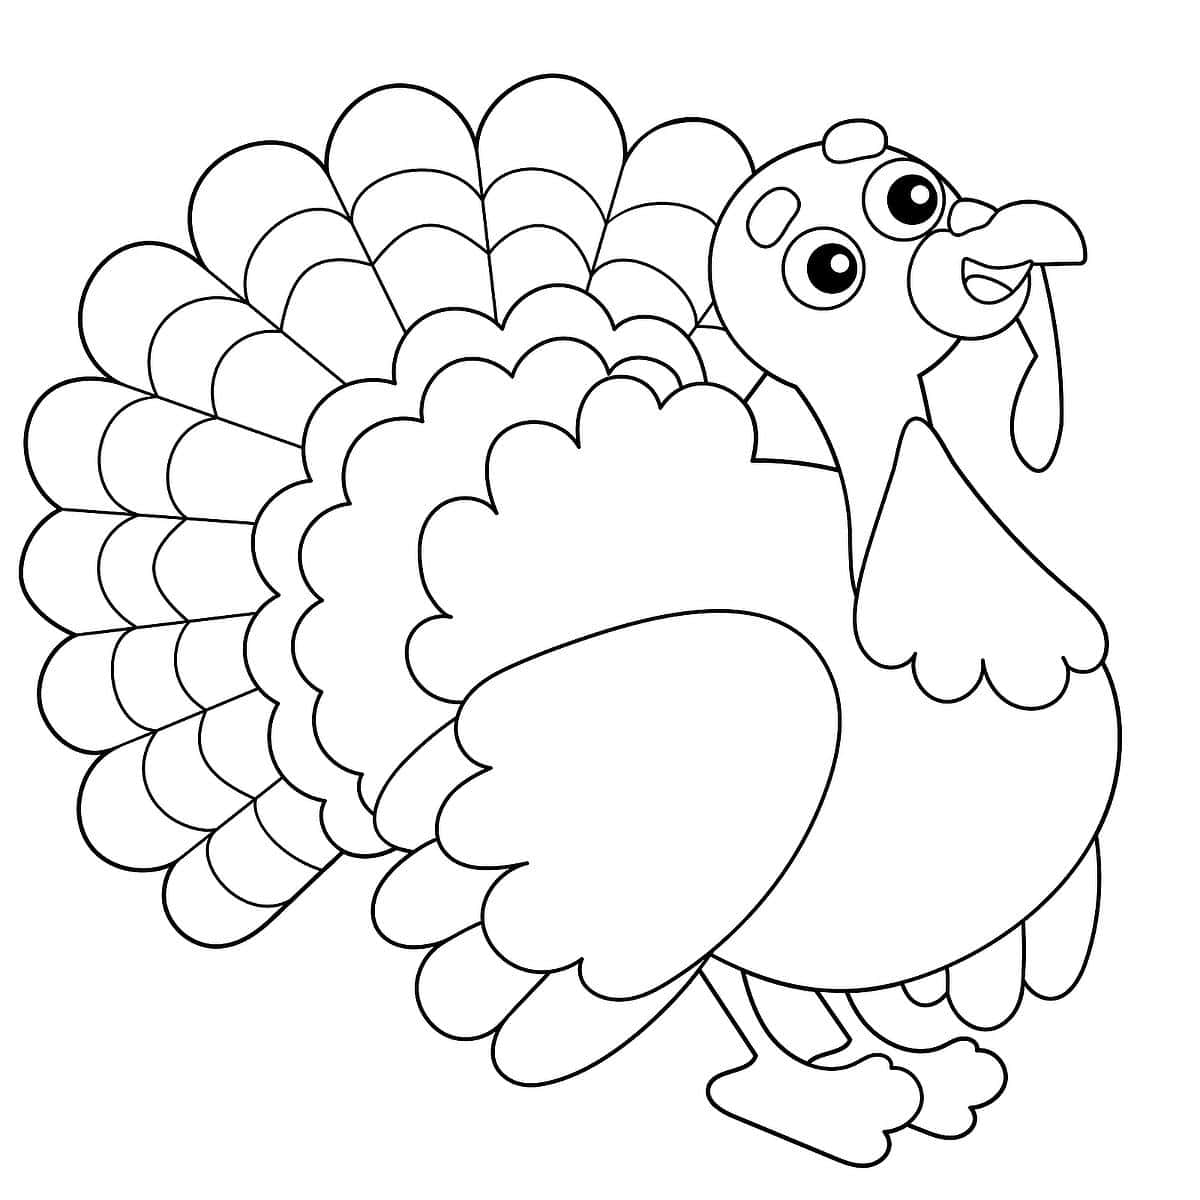 Color This Turkey's Feathers With Your Favorite Crayons